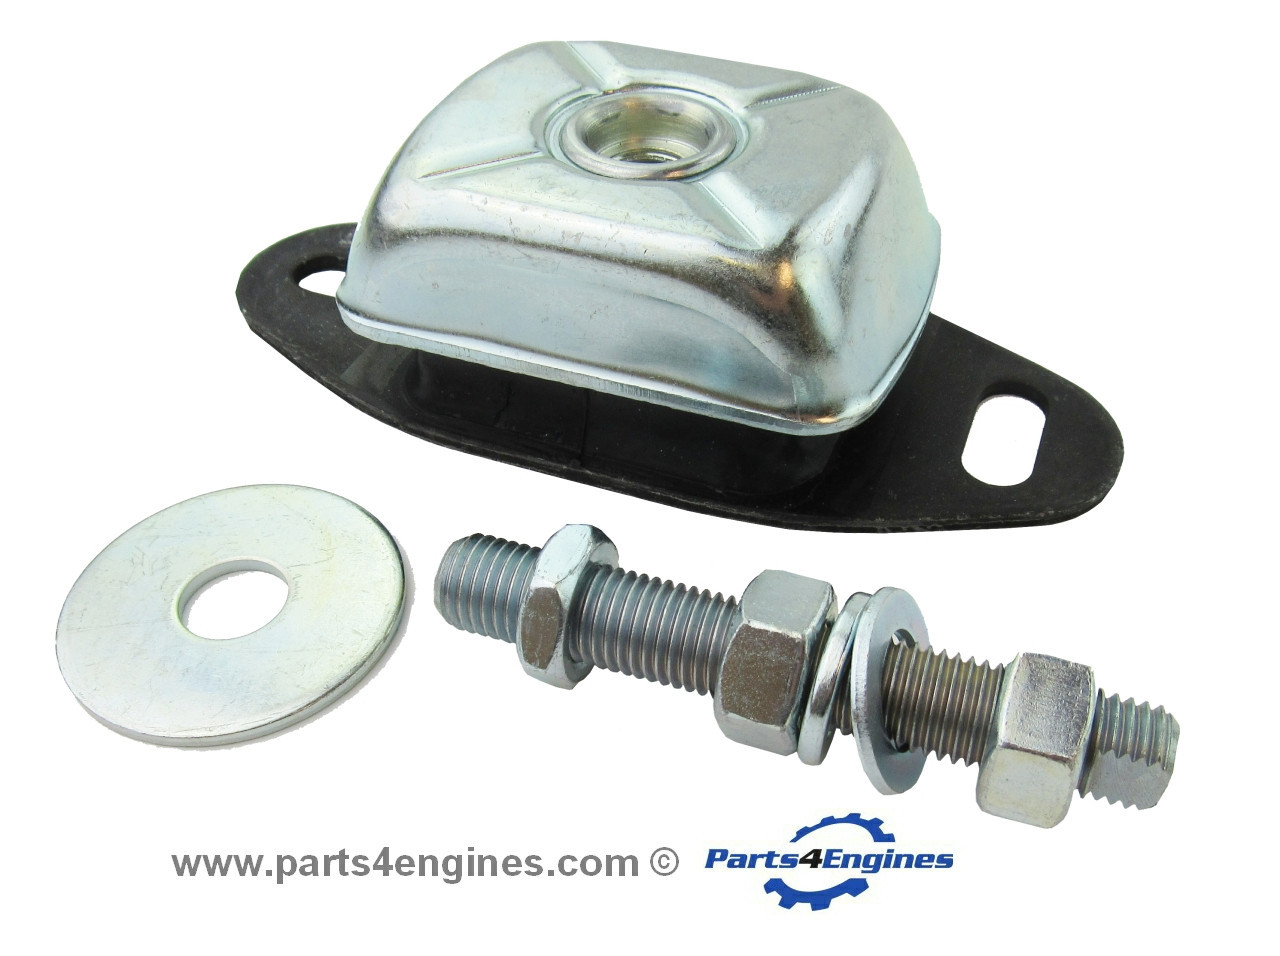 Volvo Penta D2-60F Engine mounts from parts4engines.com